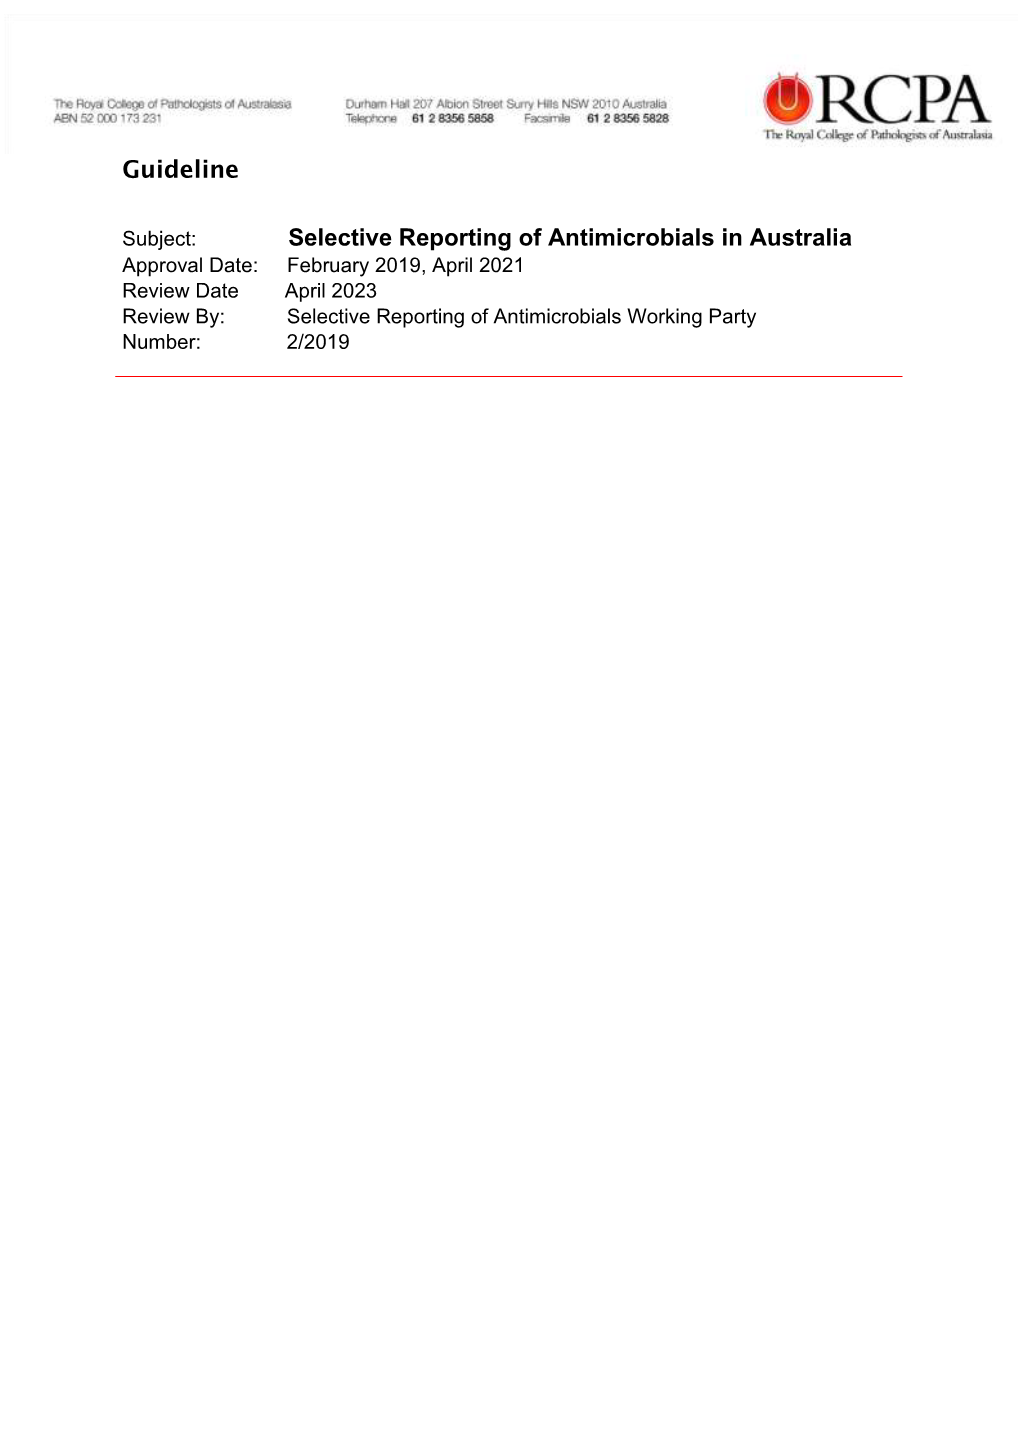 Guideline Selective Reporting of Antimicrobials in Australia